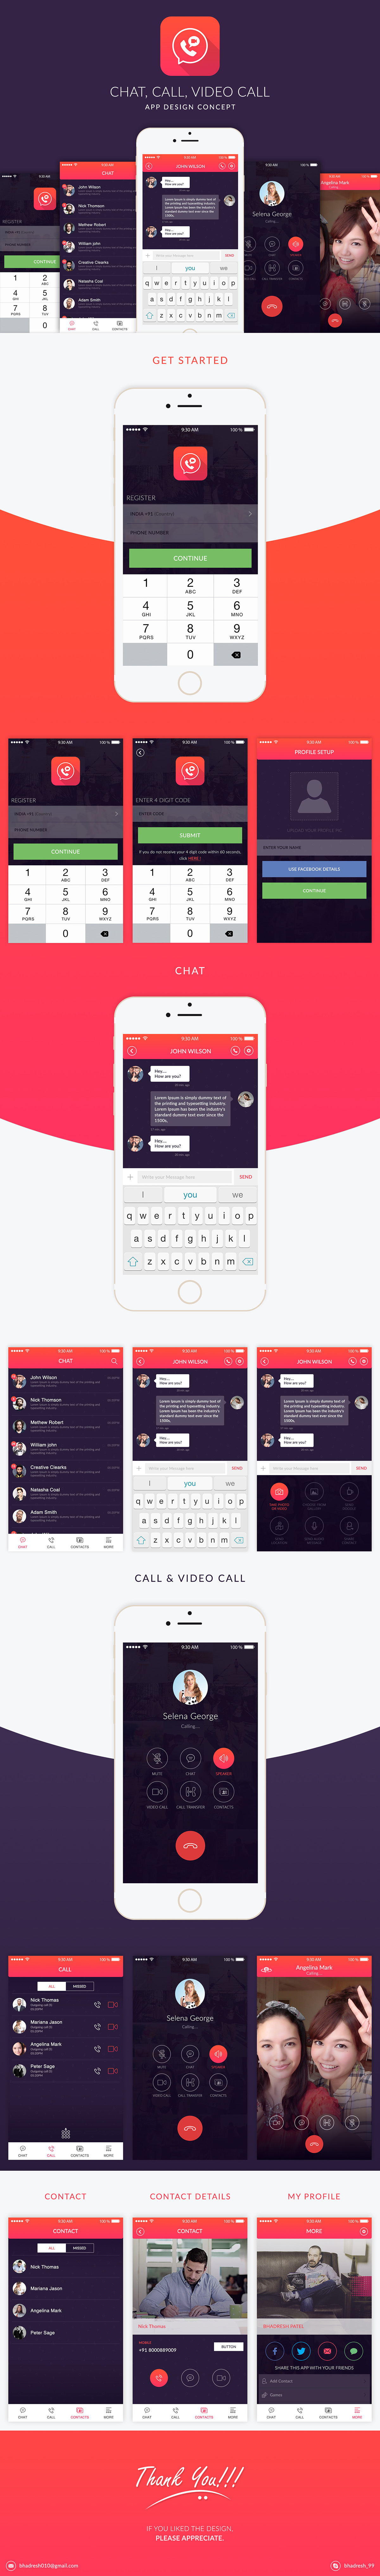 Chat, Call, Video Call App design concept.